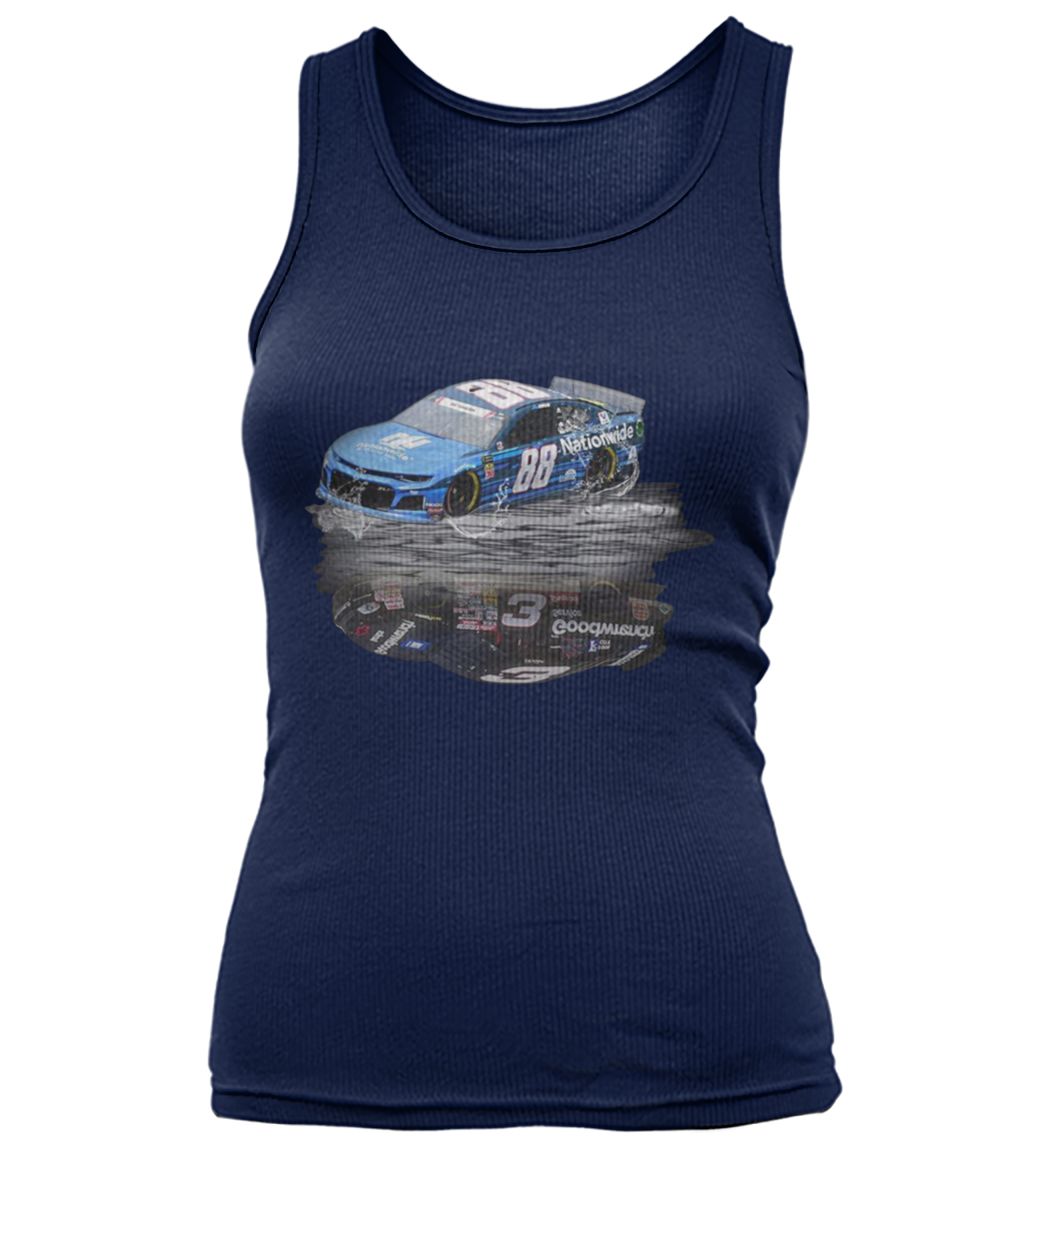 Dale earnhardt 88 nationwide and 3 goodwrench reflection women's tank top